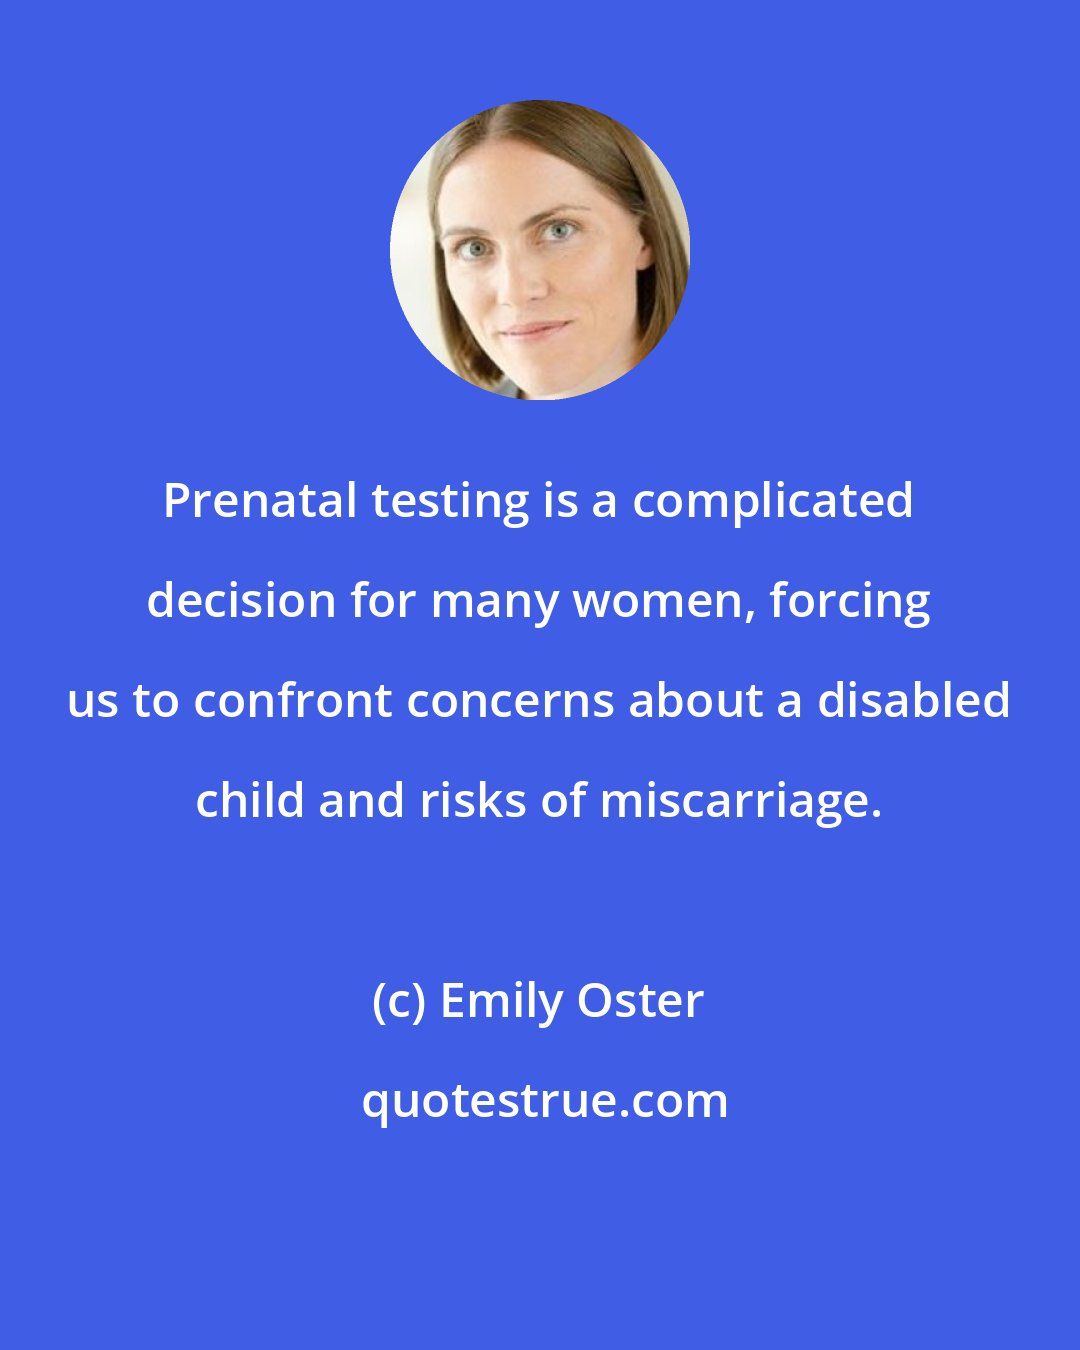 Emily Oster: Prenatal testing is a complicated decision for many women, forcing us to confront concerns about a disabled child and risks of miscarriage.